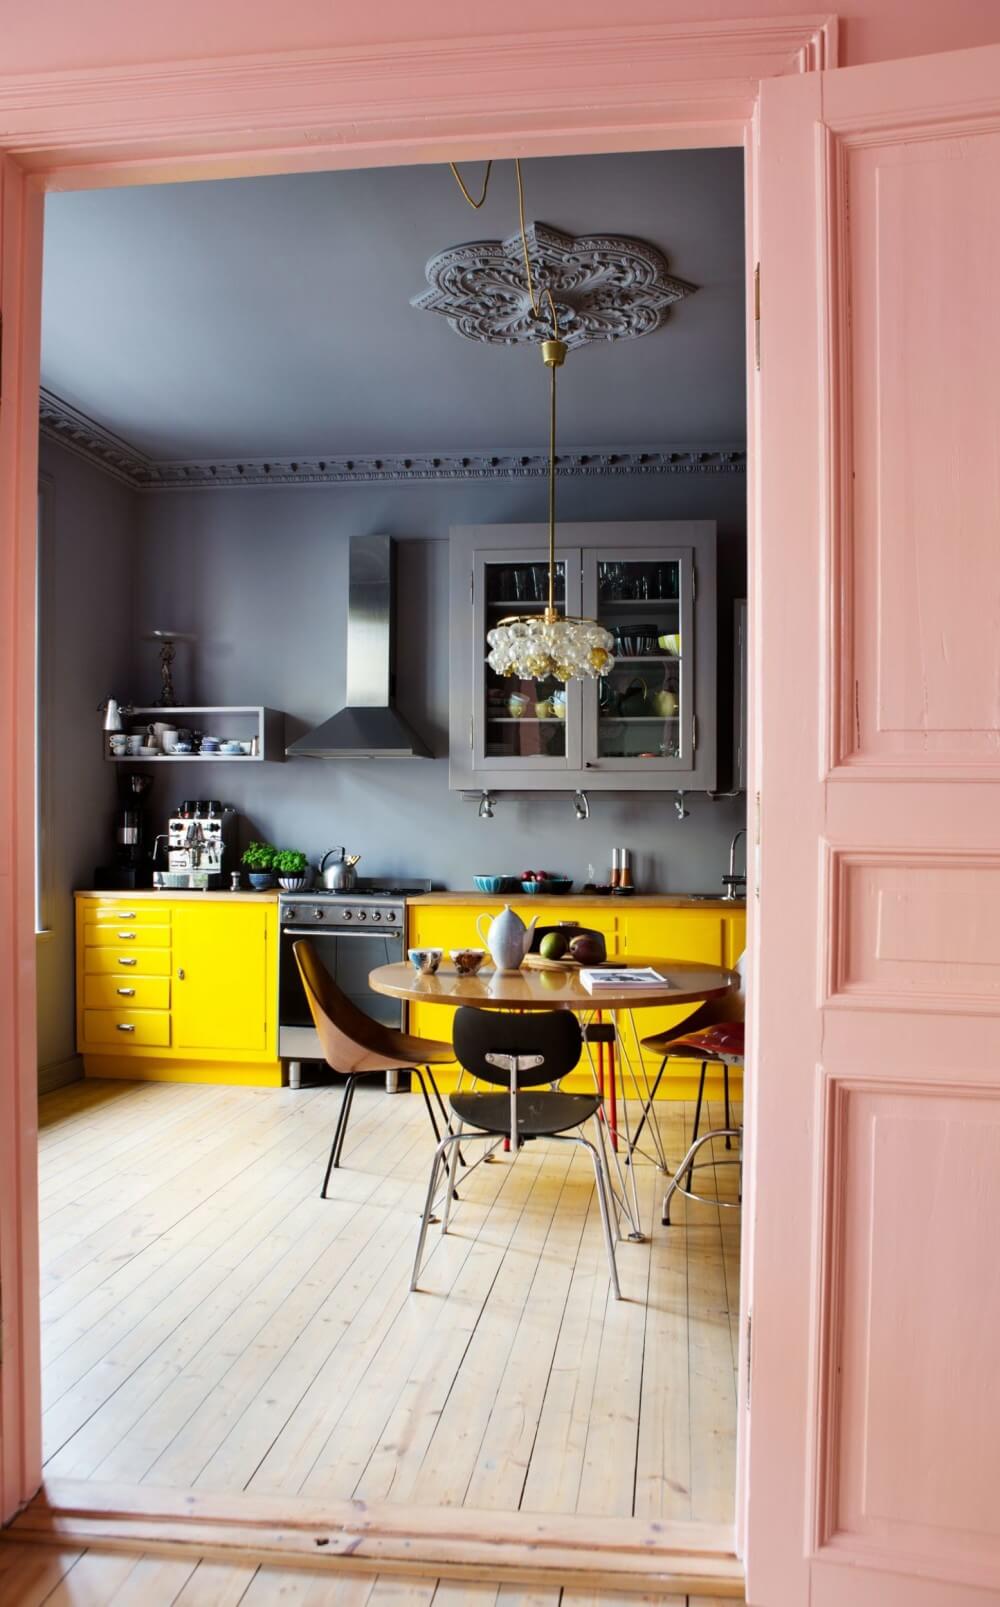 Colourful decor inspiration. Unusual kitchen colour inspiration - combining pink, grey and yellow